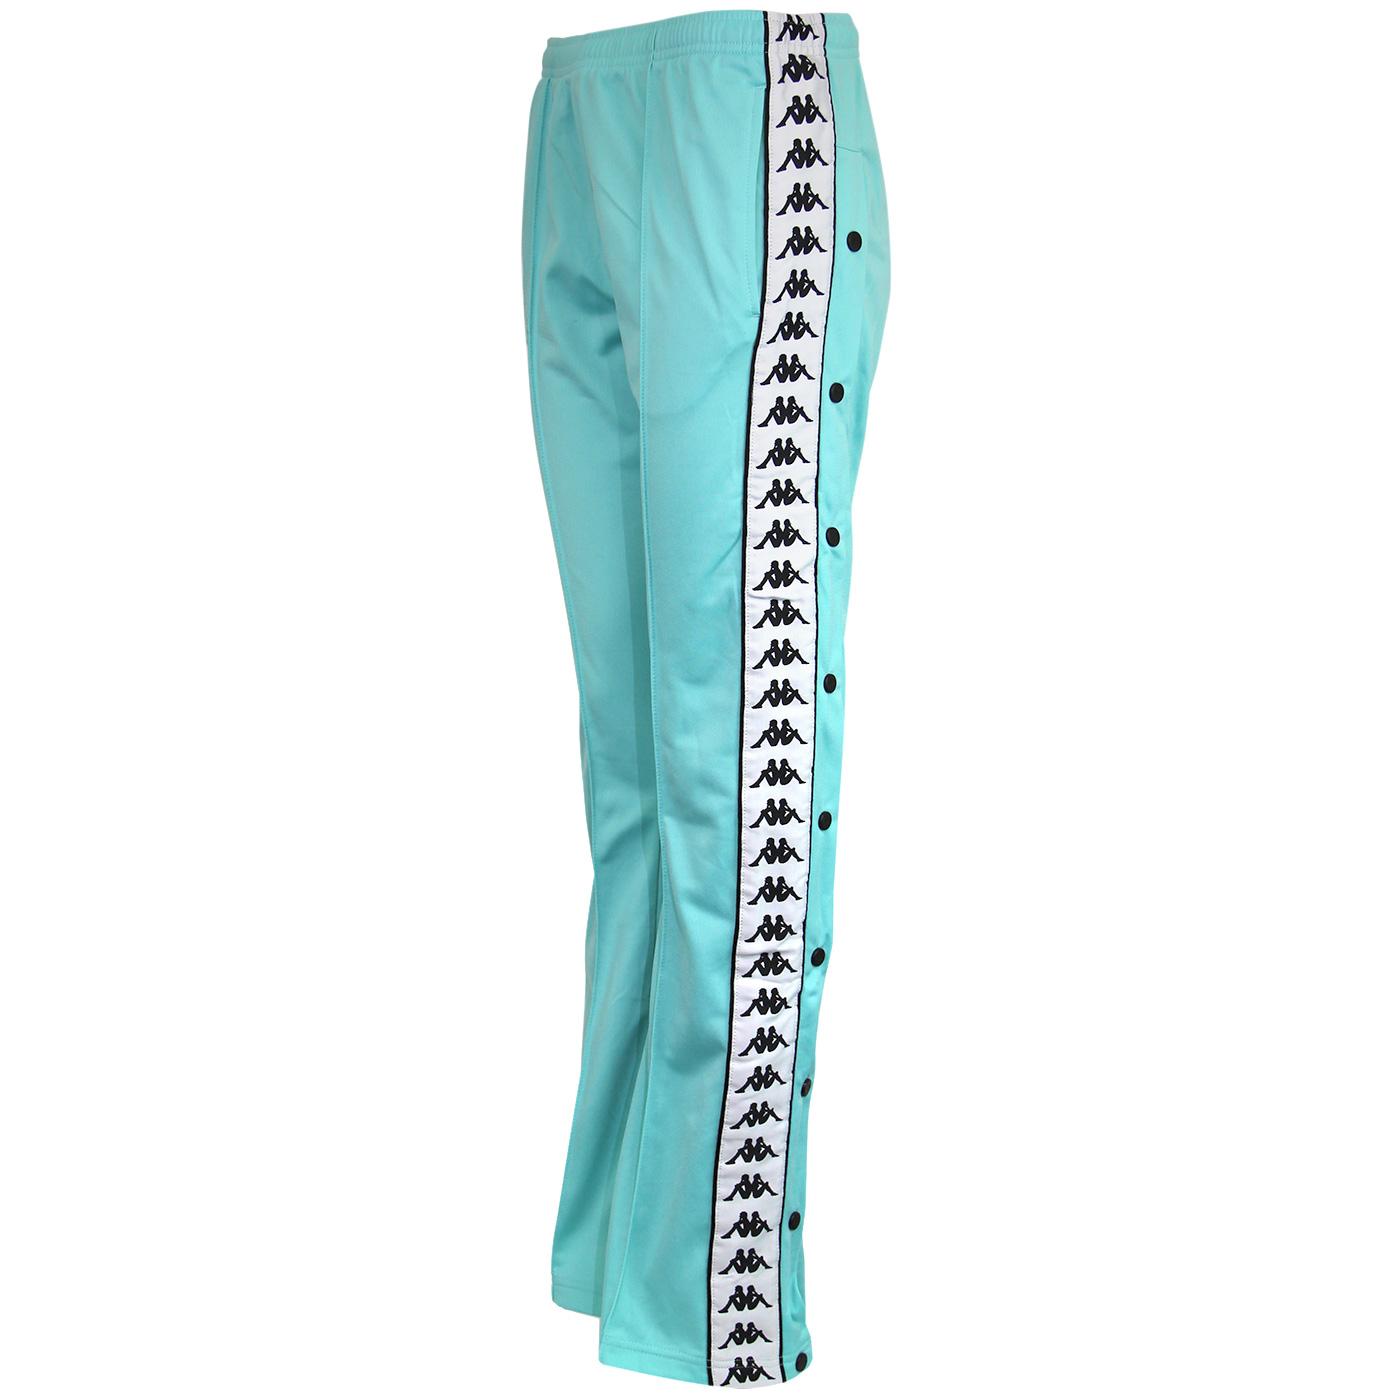 V3 Apparel Womens Seamless Unity Workout Leggings - Mint - Gym, Running,  Yoga Tights